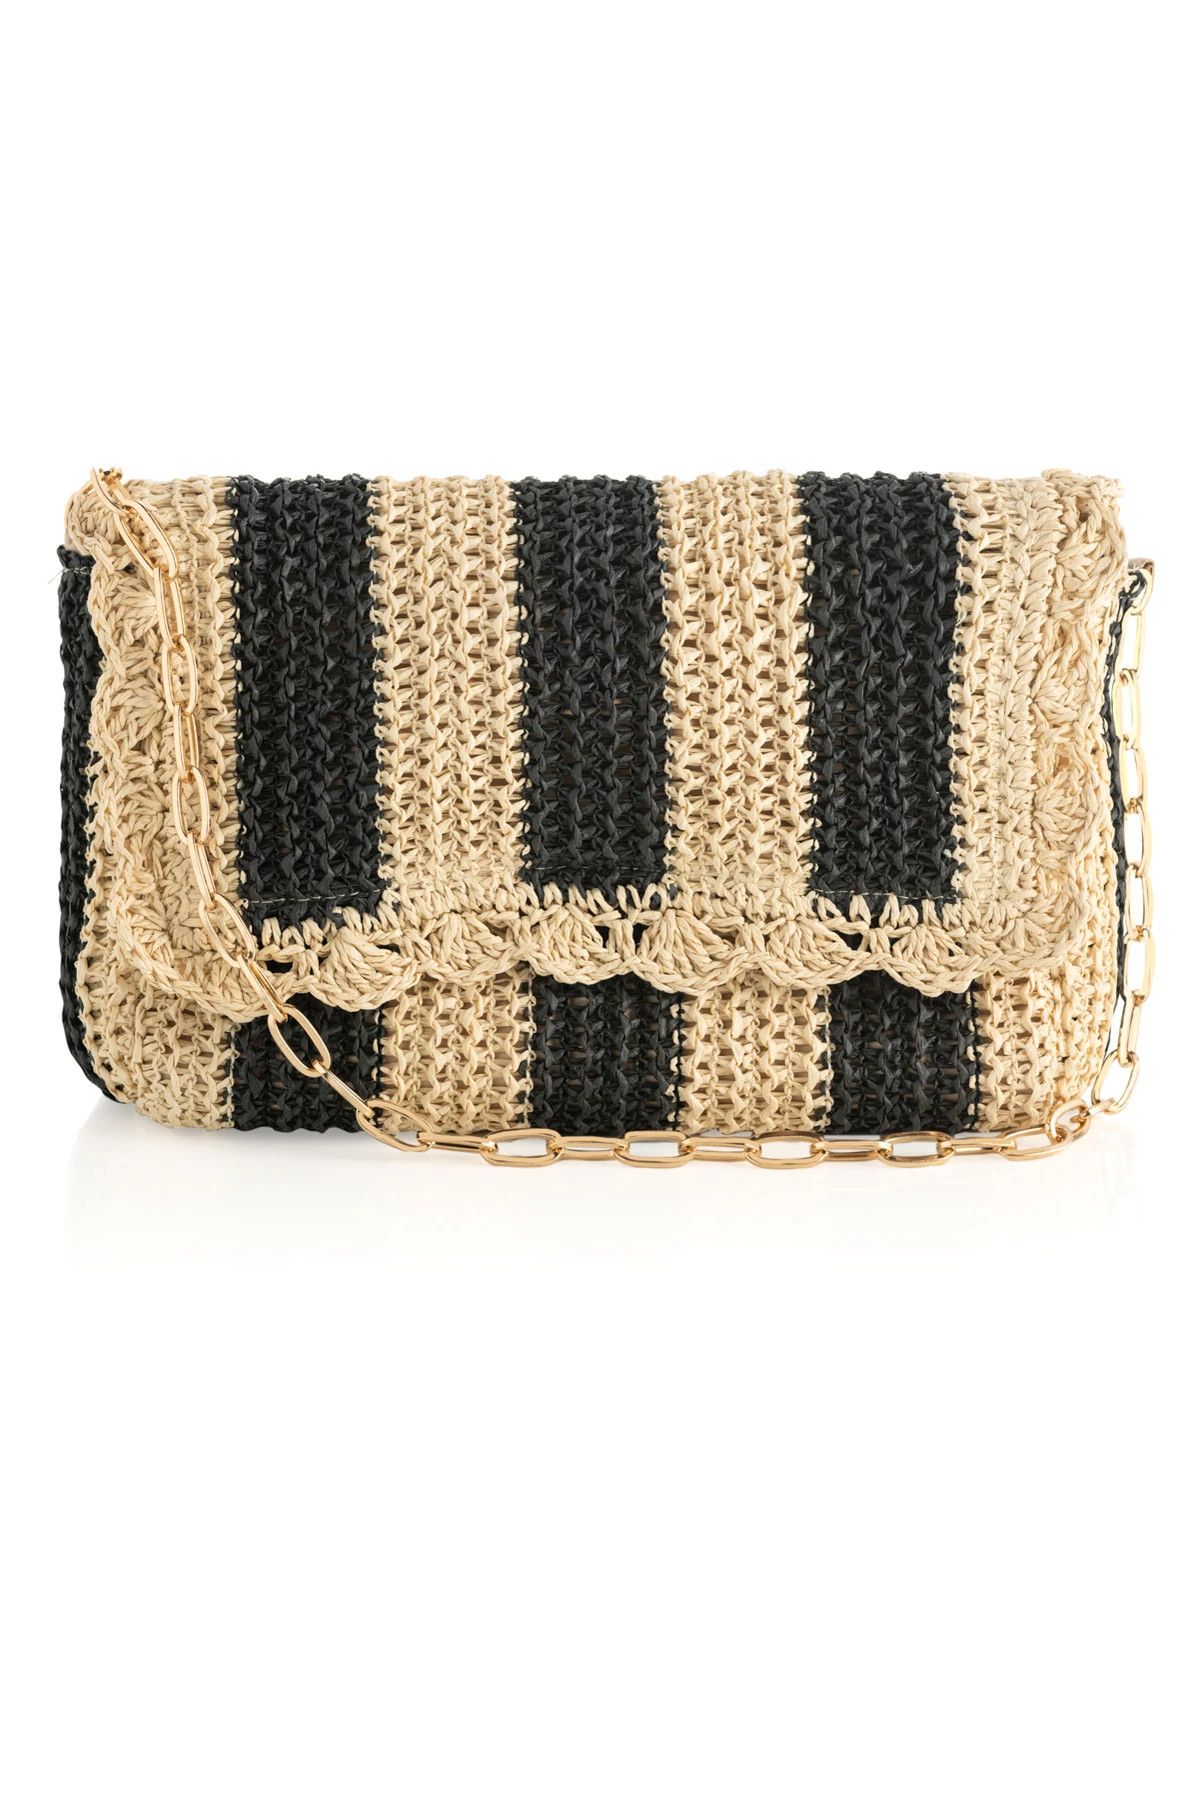 Sandy Shoulder Clutch | Everything But Water